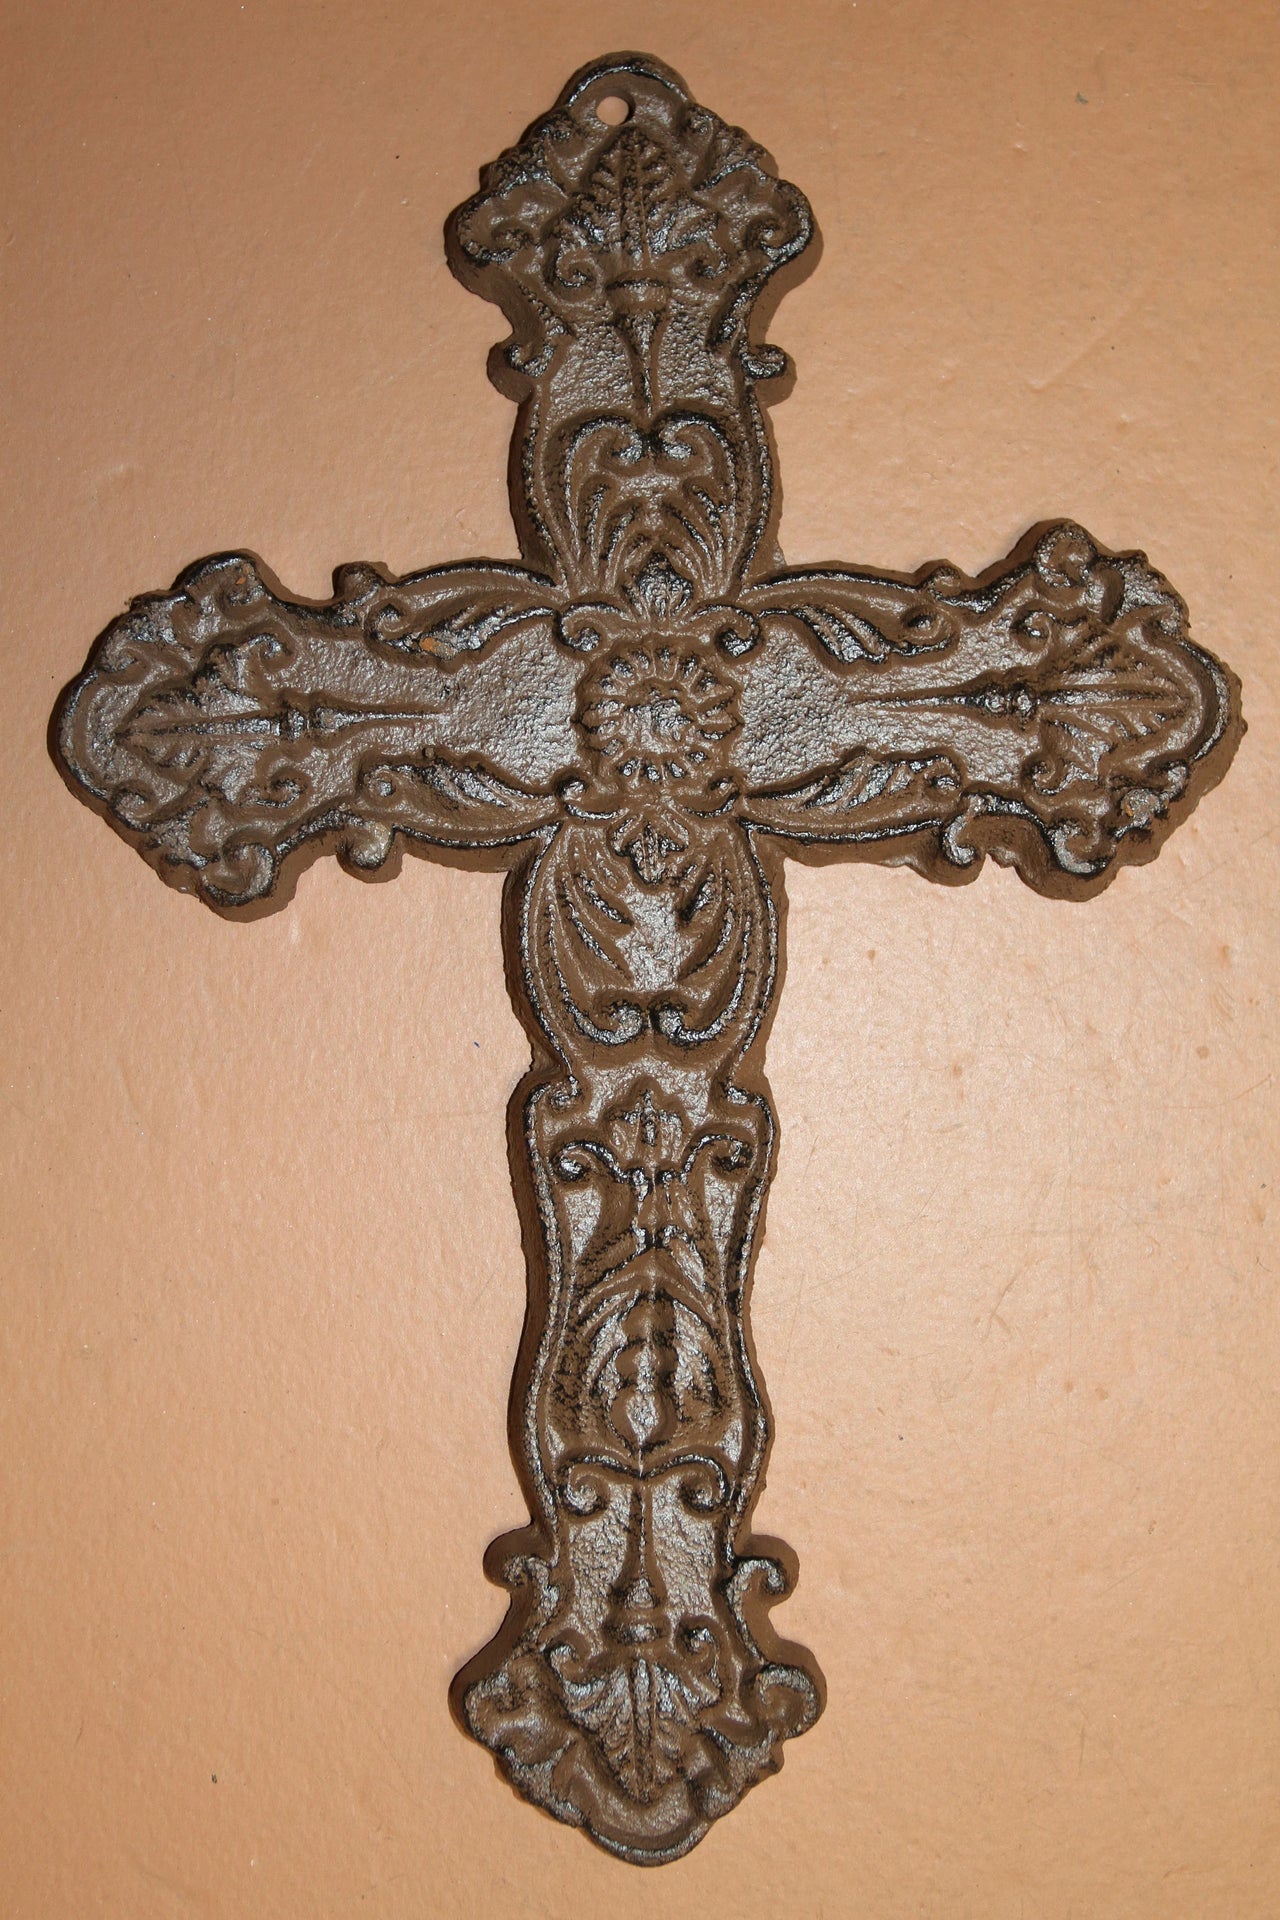 New! Cast Iron Fleur de Lis Hanging Wall Cross - Rustic decor, religious, spirituality gift ideas and more! Ships Free! C-15